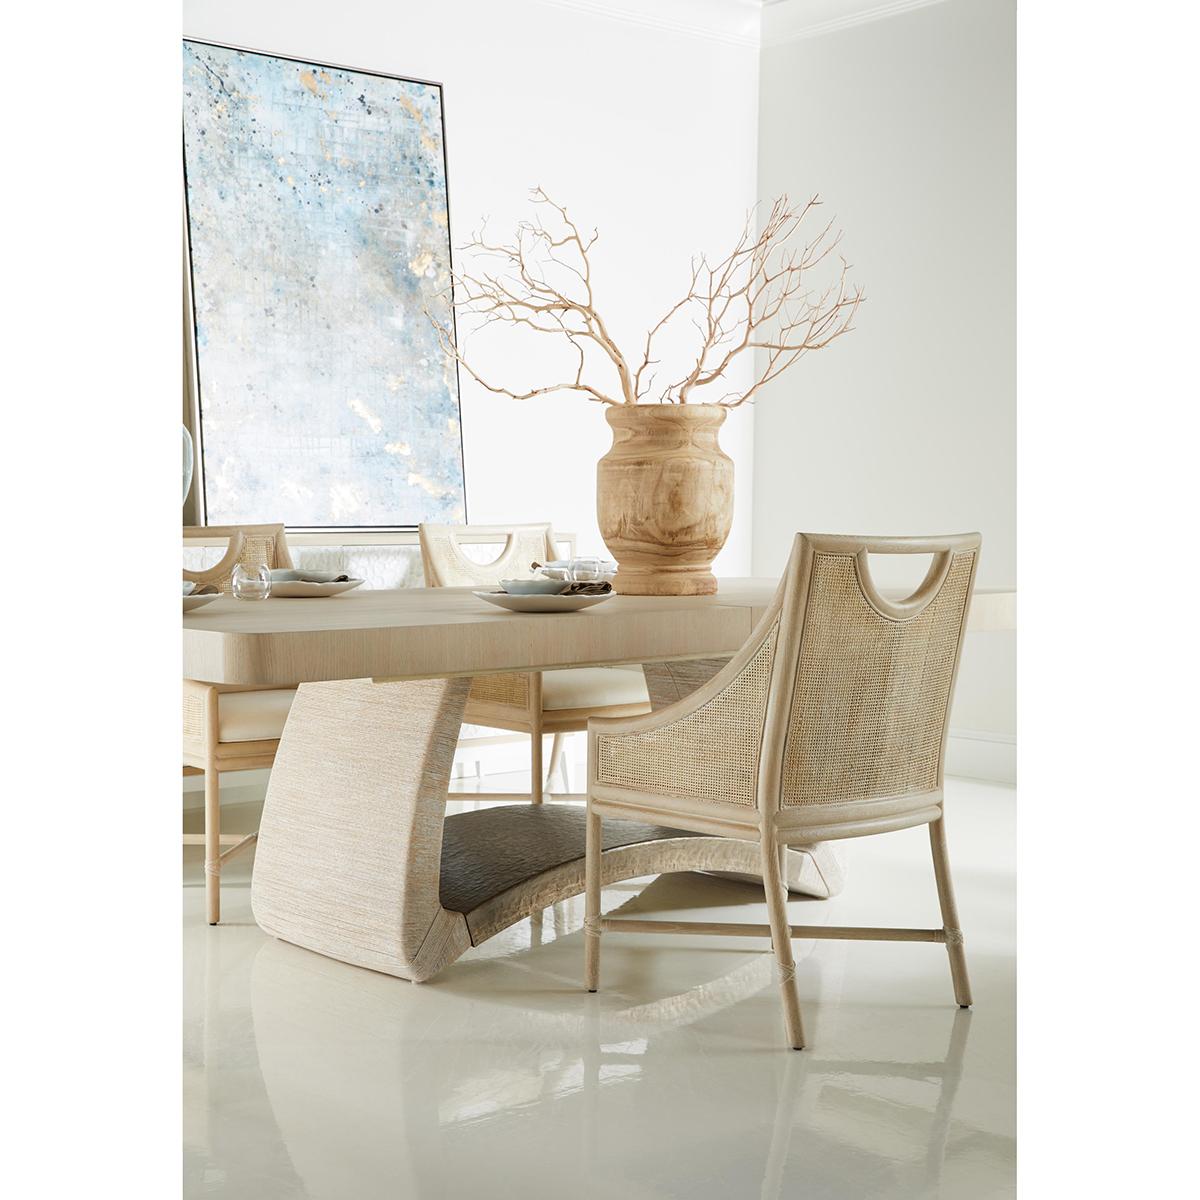 Vietnamese Modern Coastal Dining Chairs For Sale